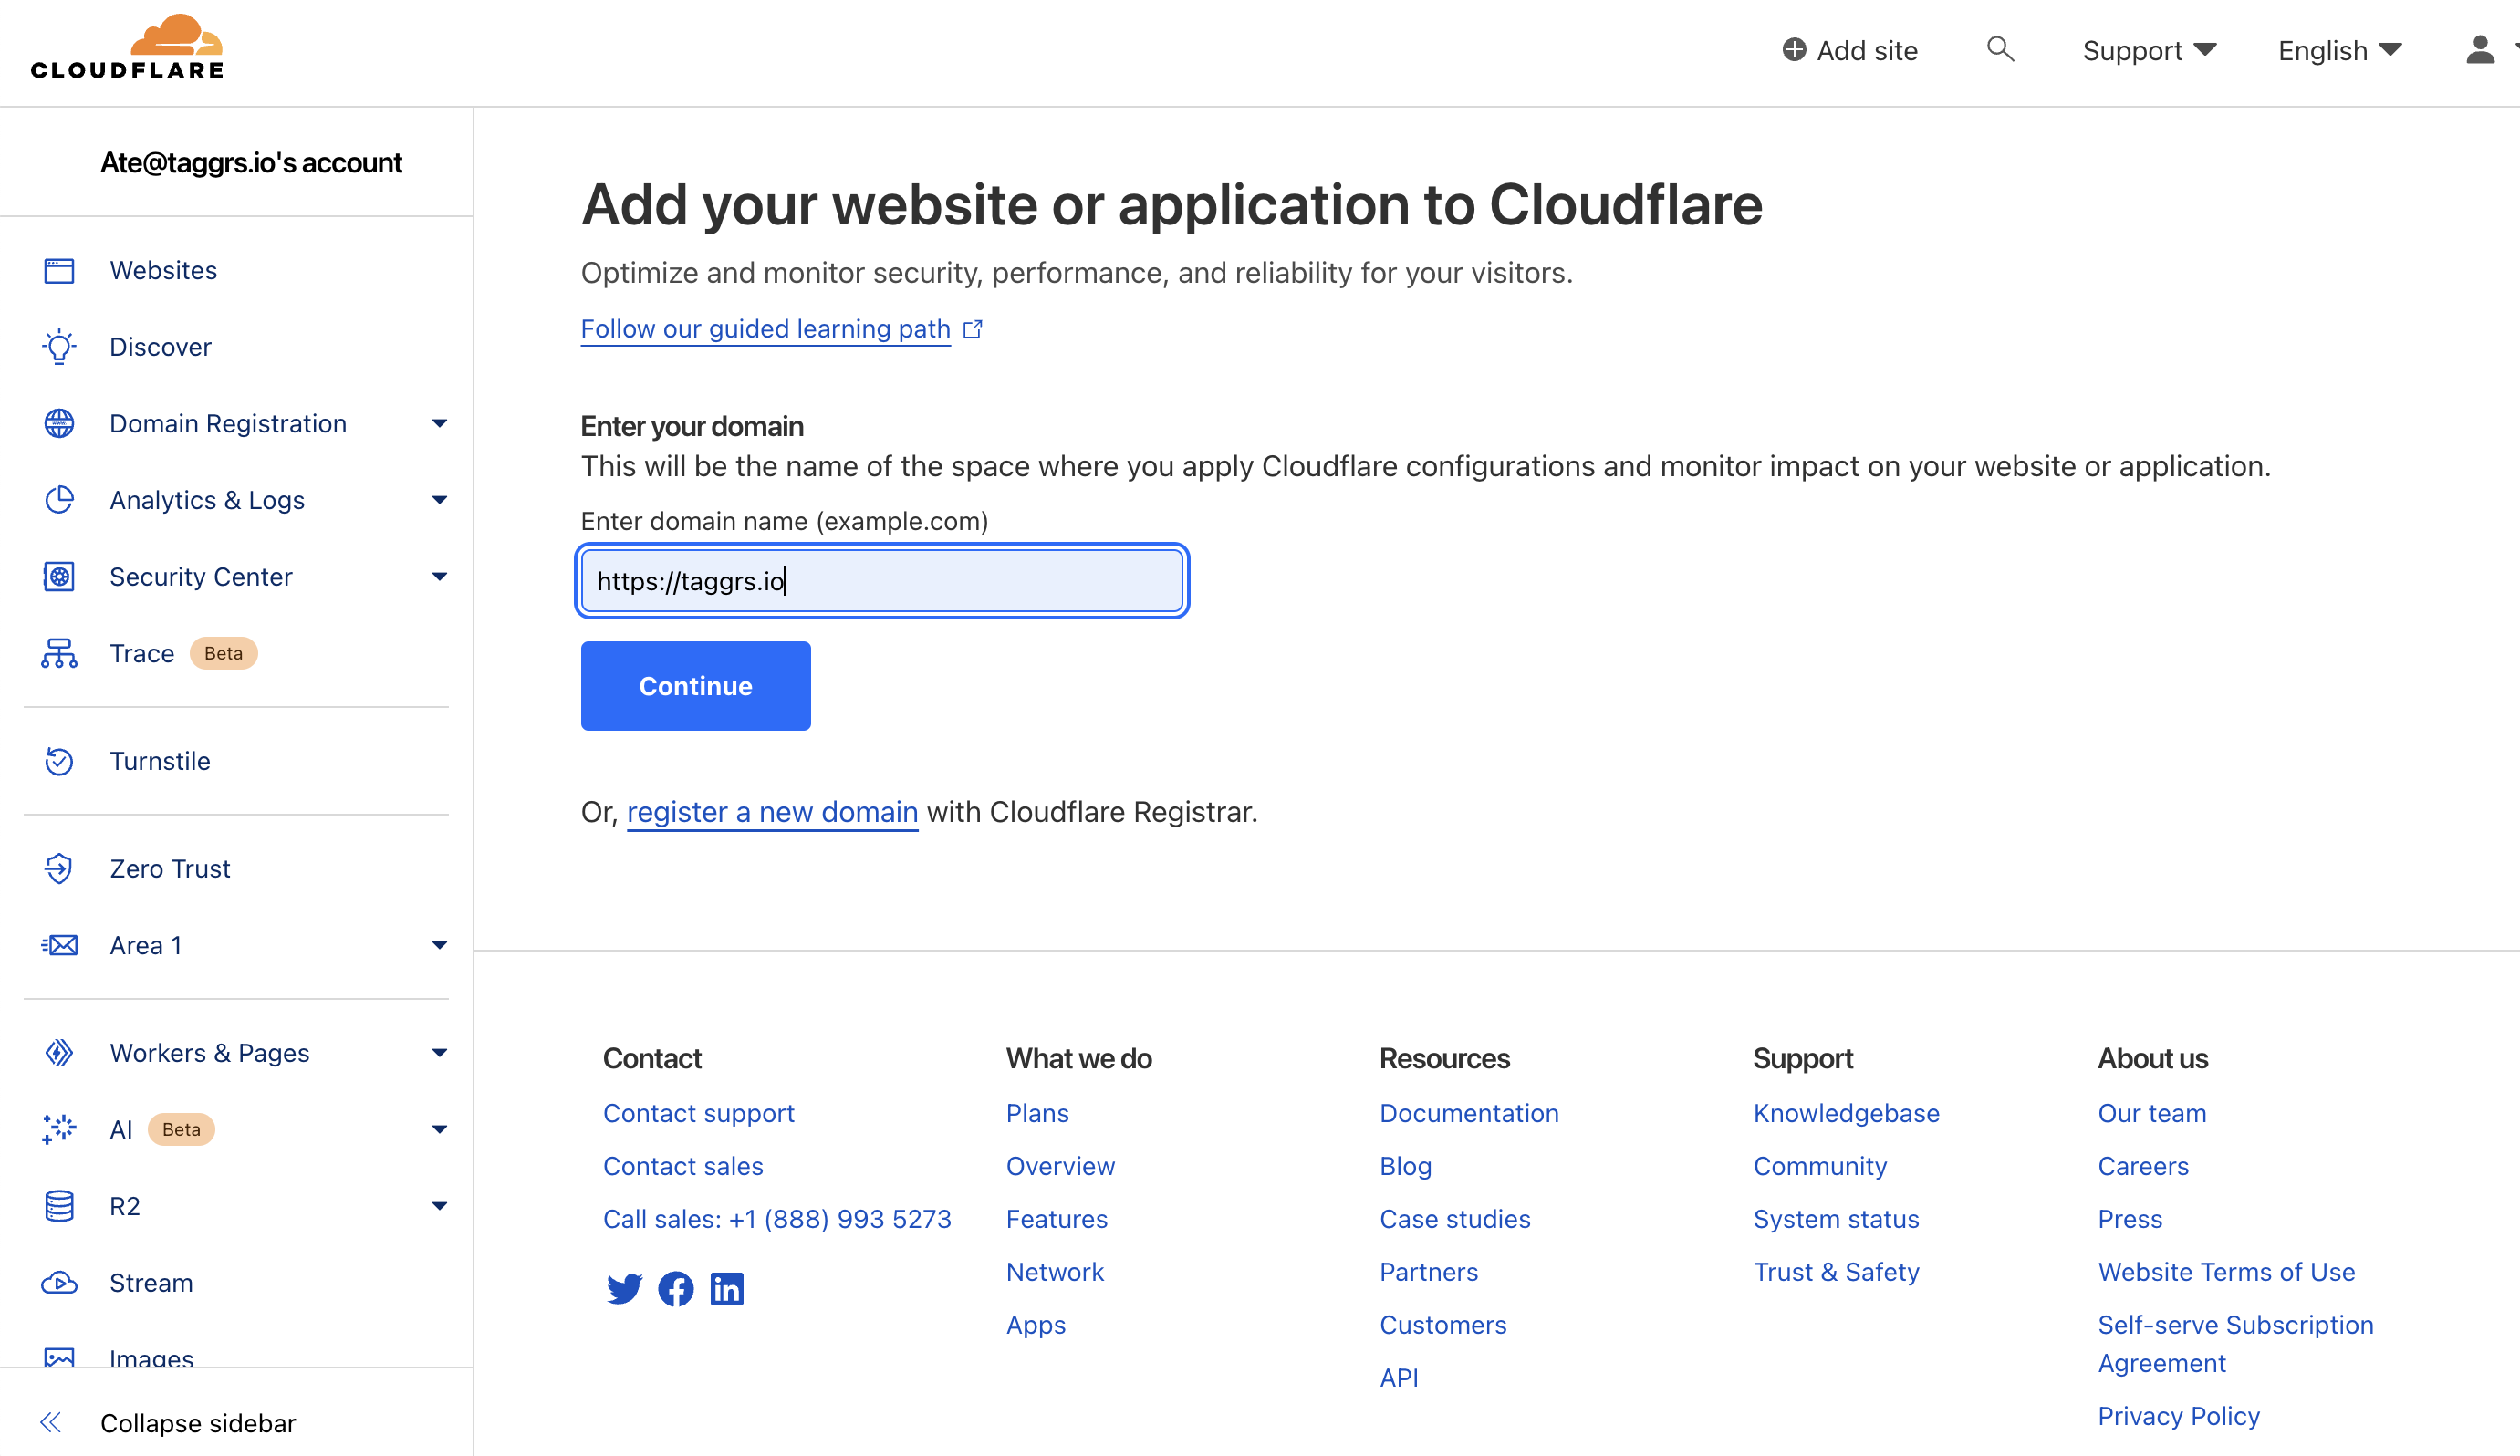 Add your website or application to Cloudflare